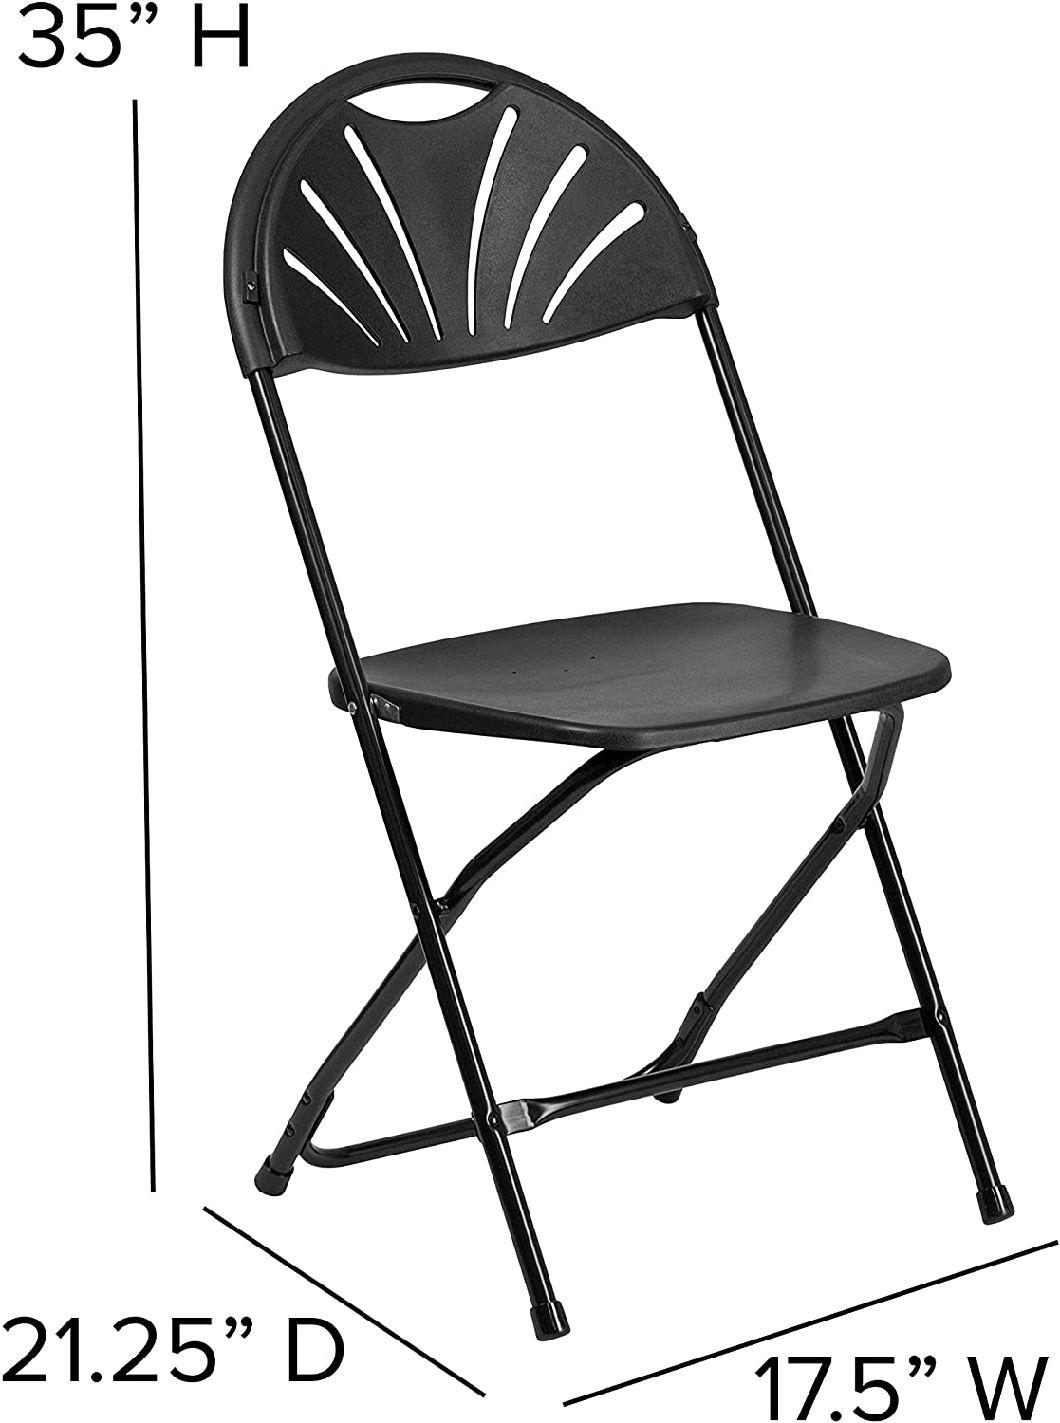 Lightweight Portable Plastic Folding Chair with White, Black, Red, Grey Colors